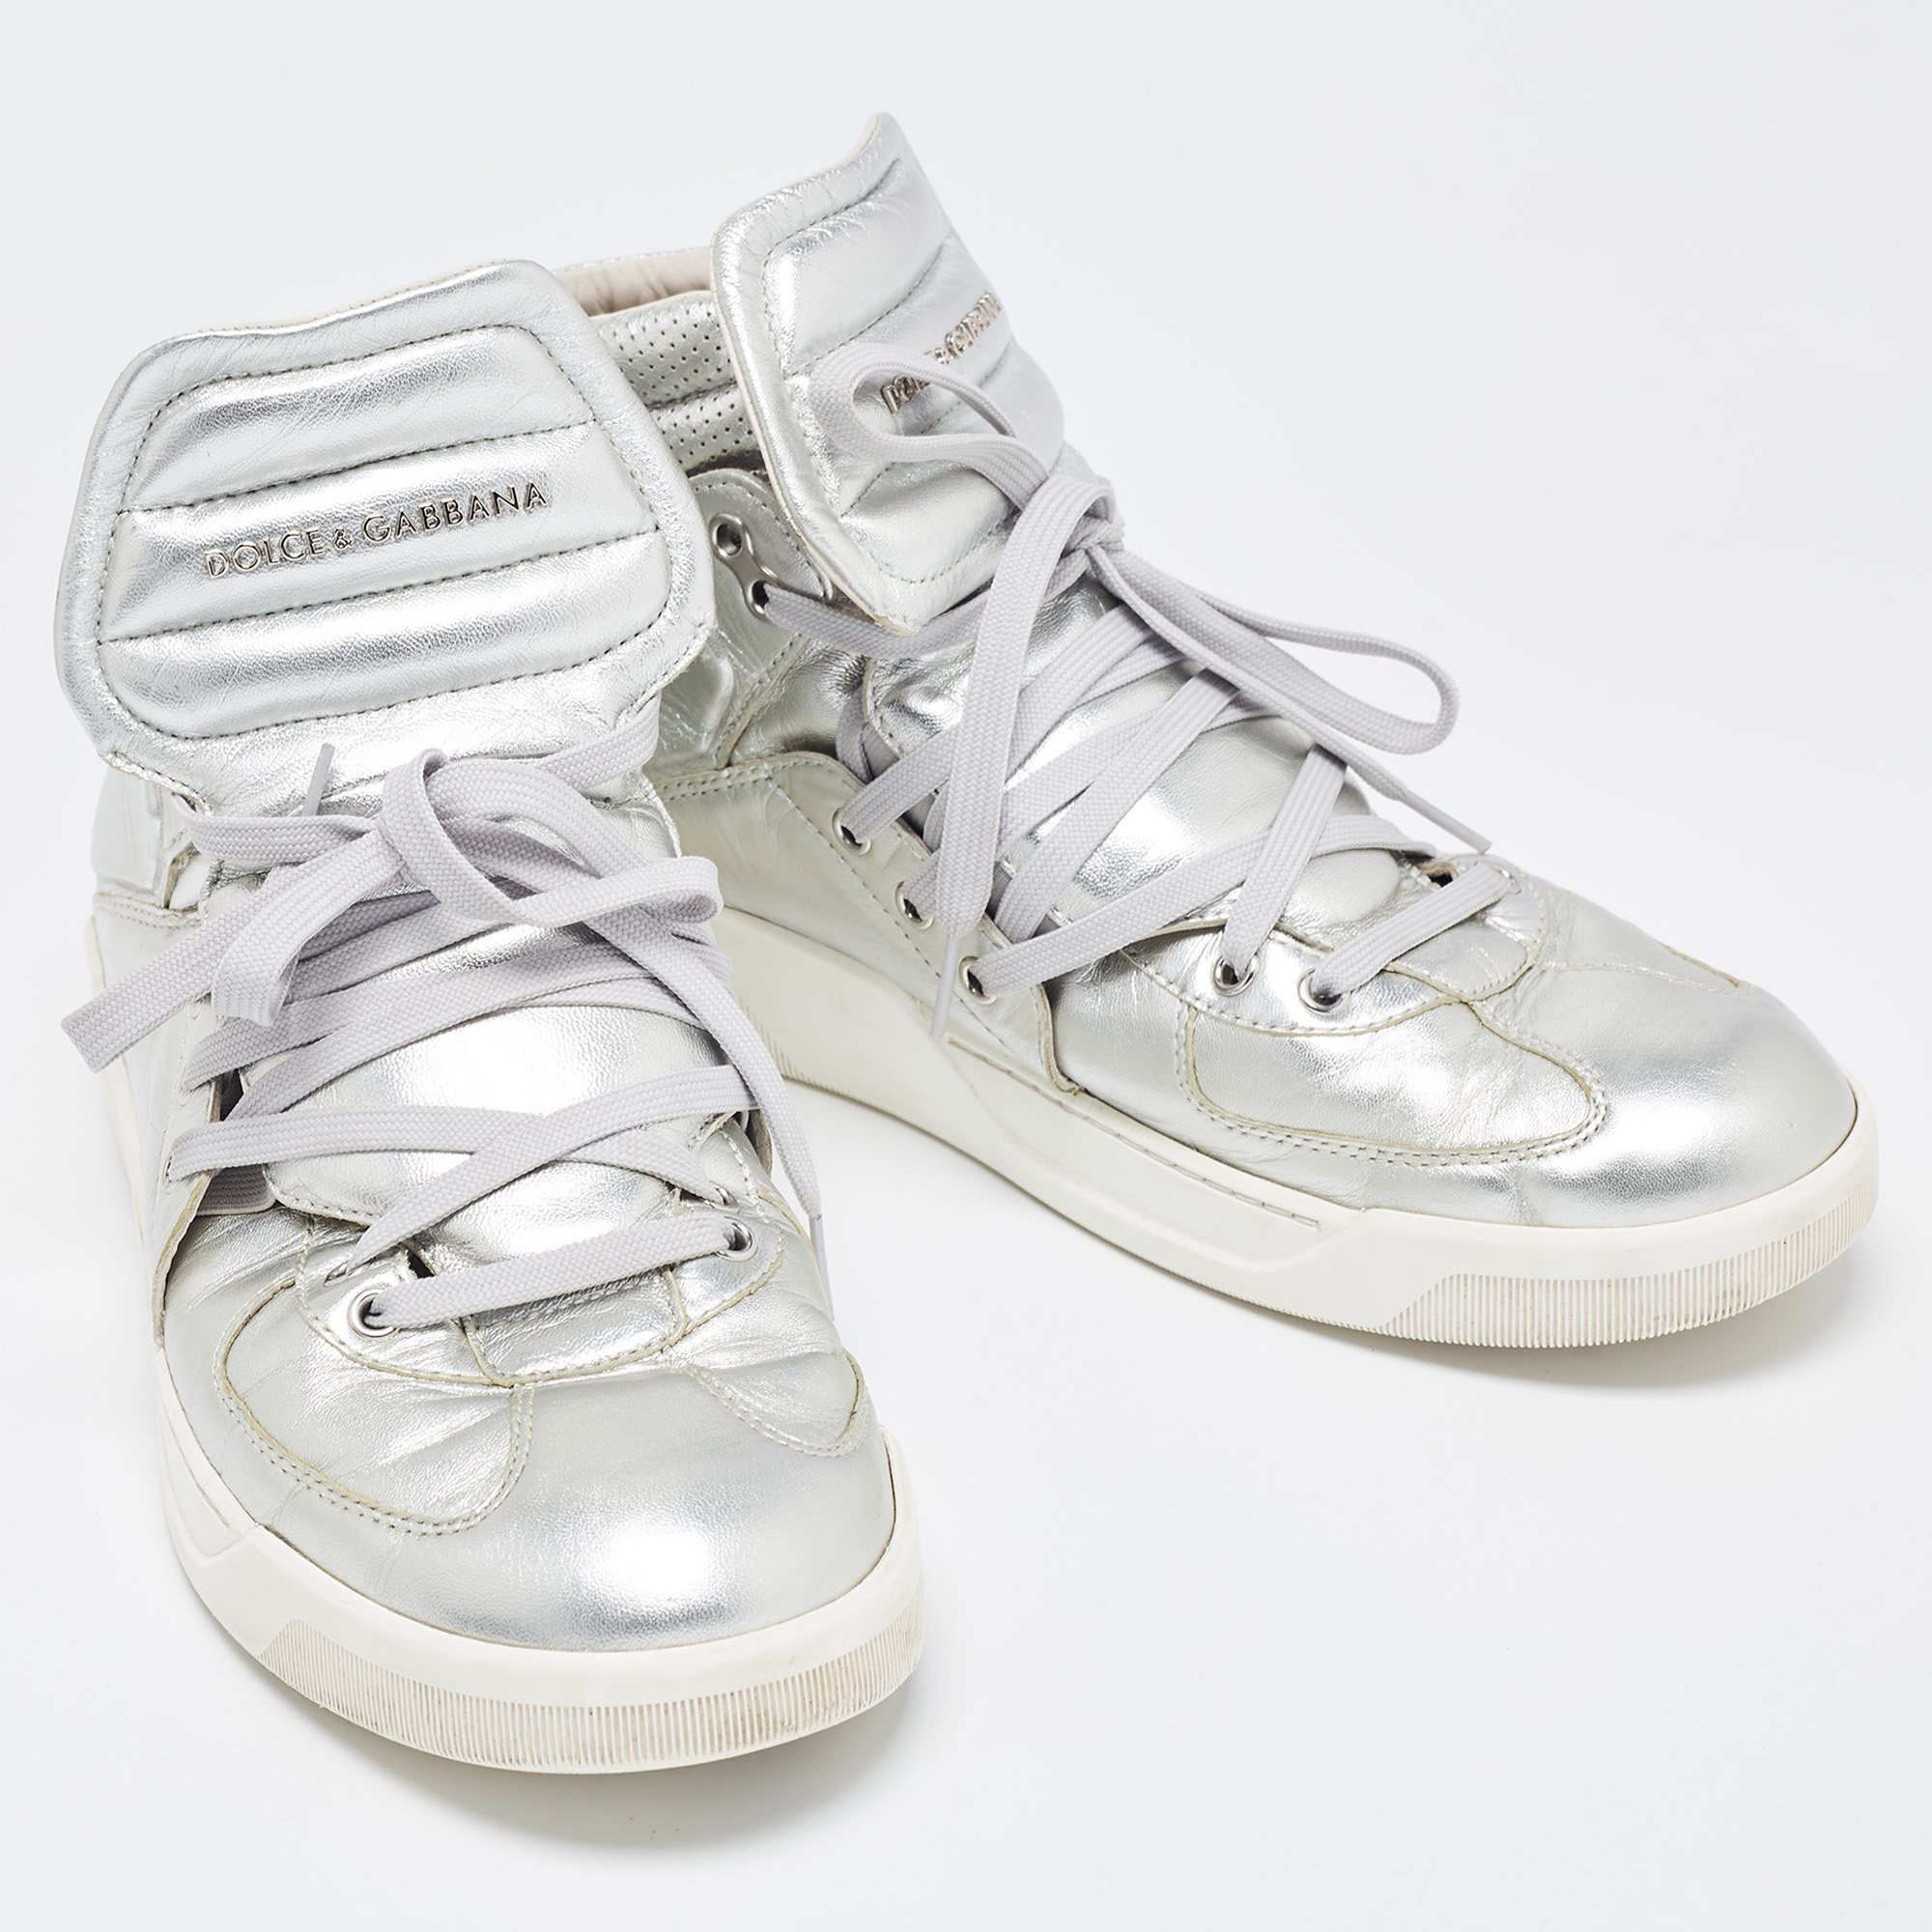 Dolce & Gabbana Silver Leather Benelux High Top Sneakers Size 45